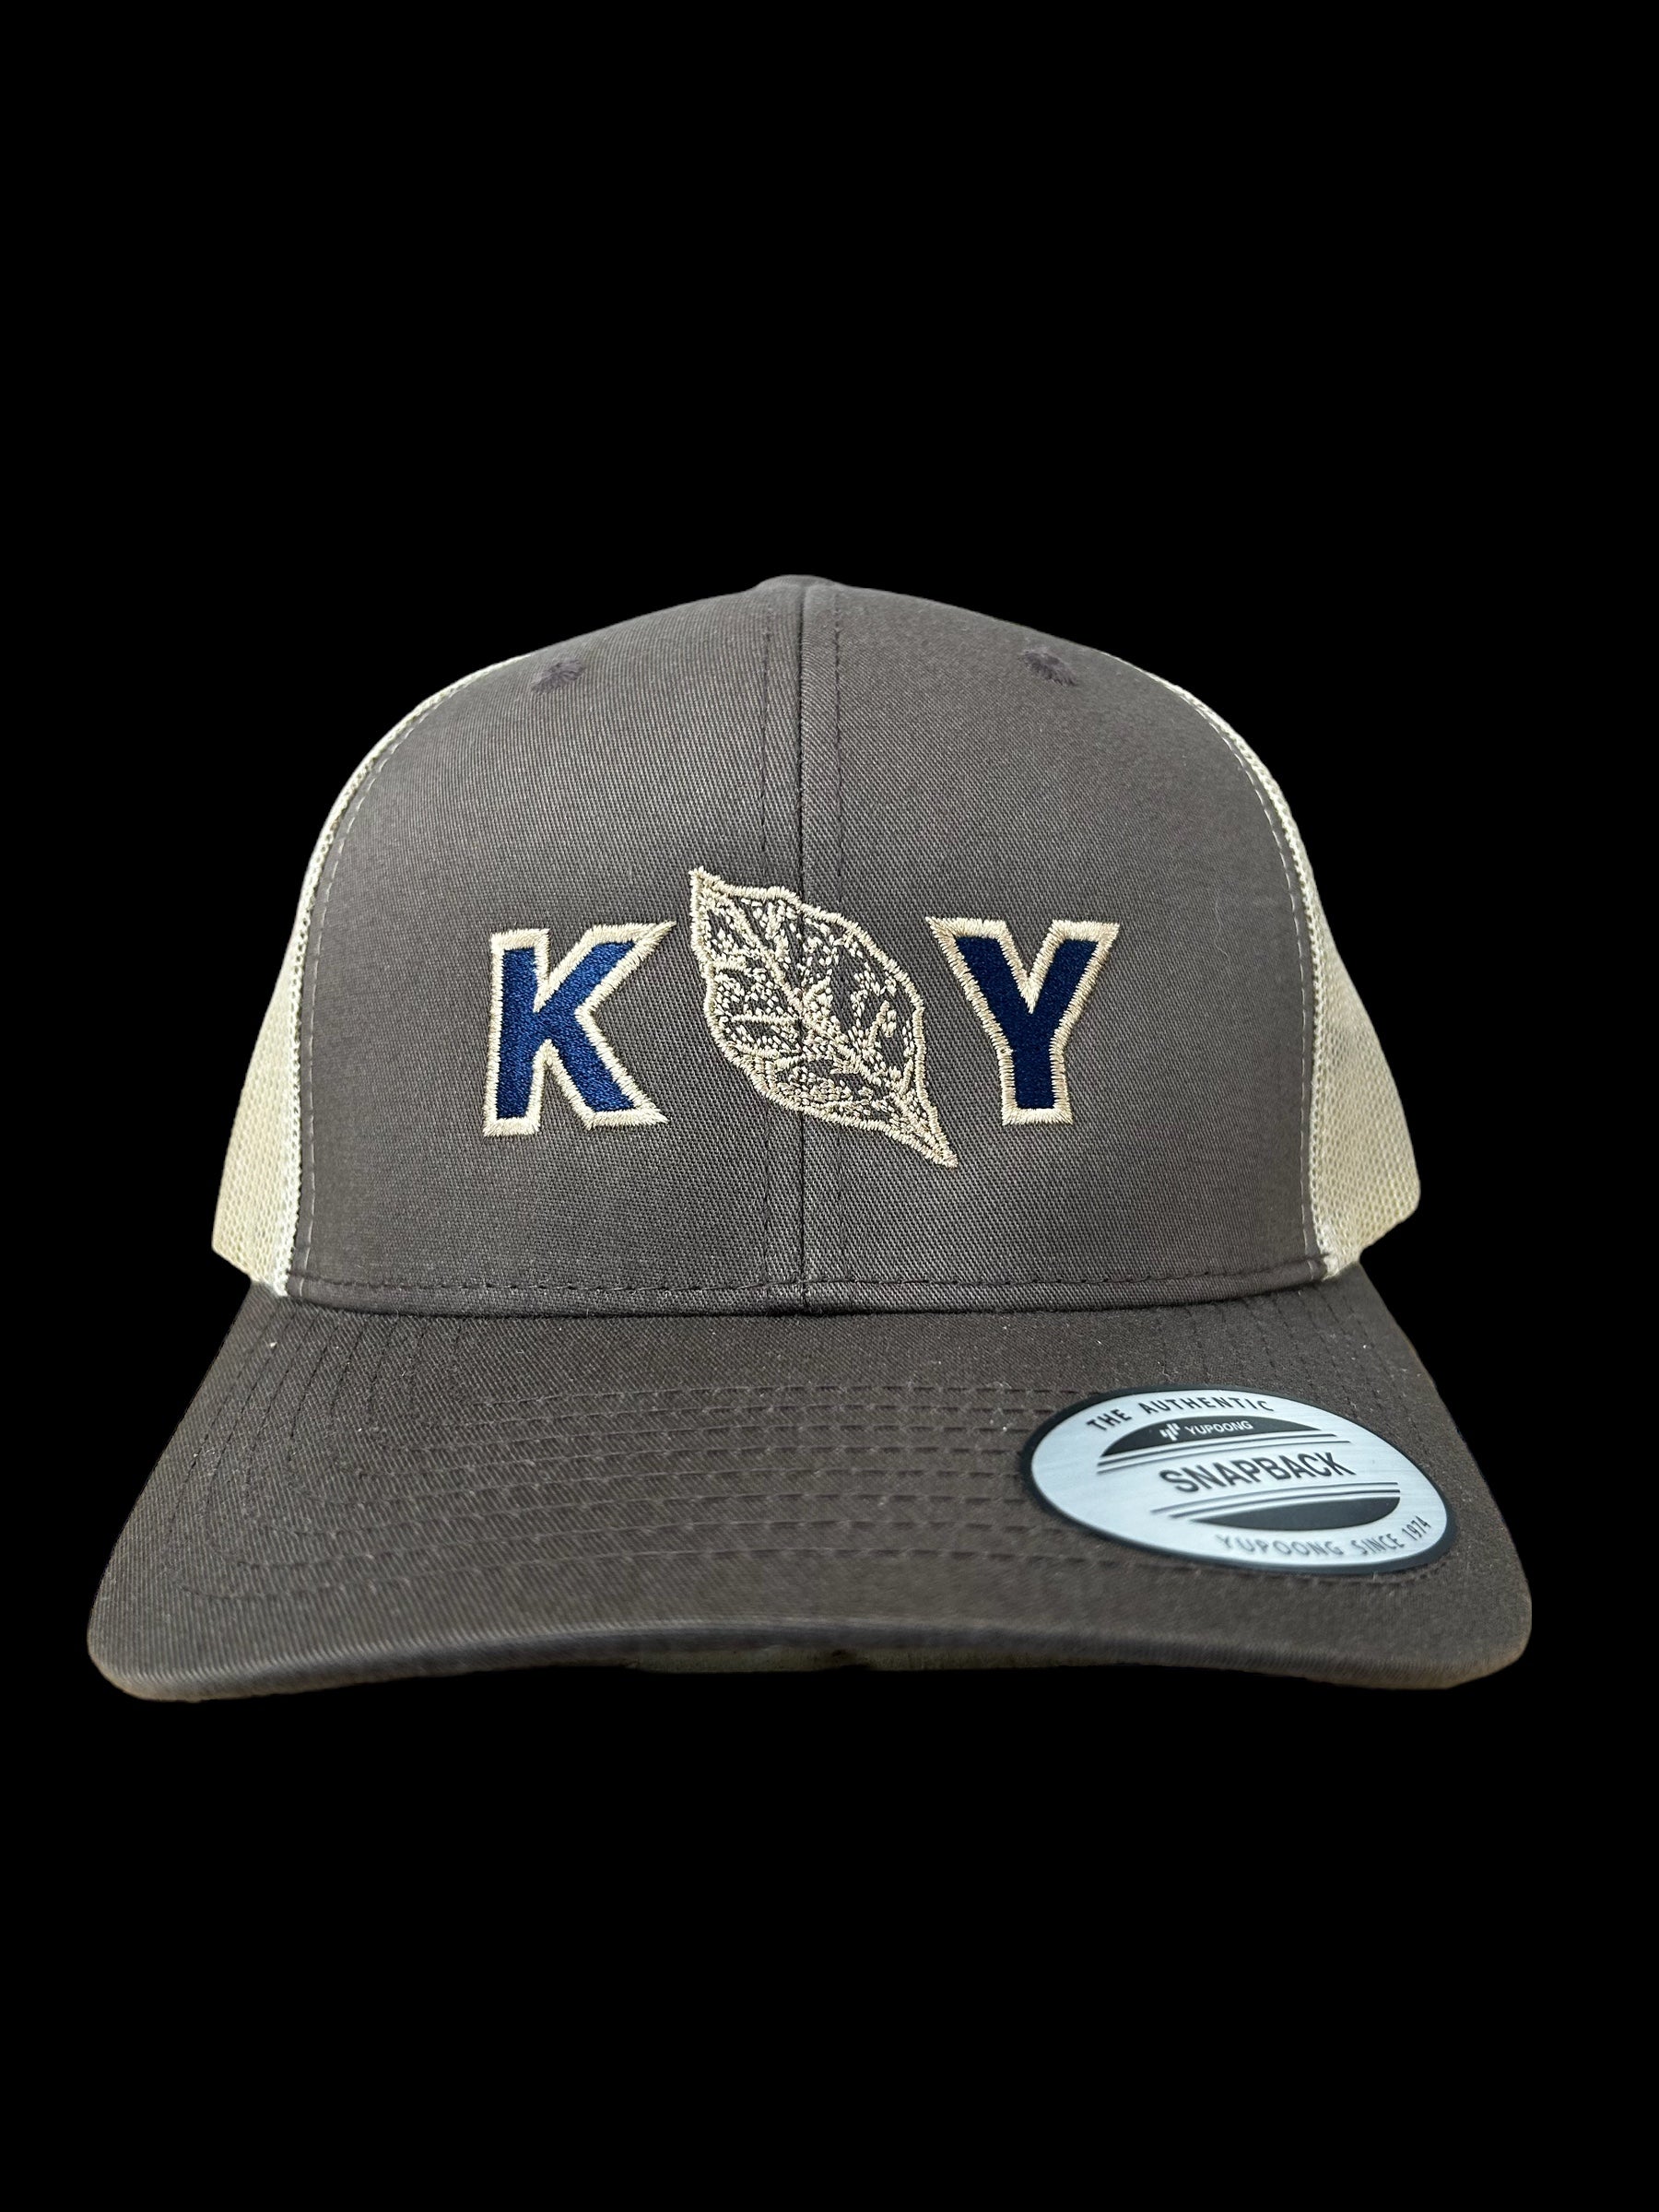 Kentucky Tobacco Embroidered Hat